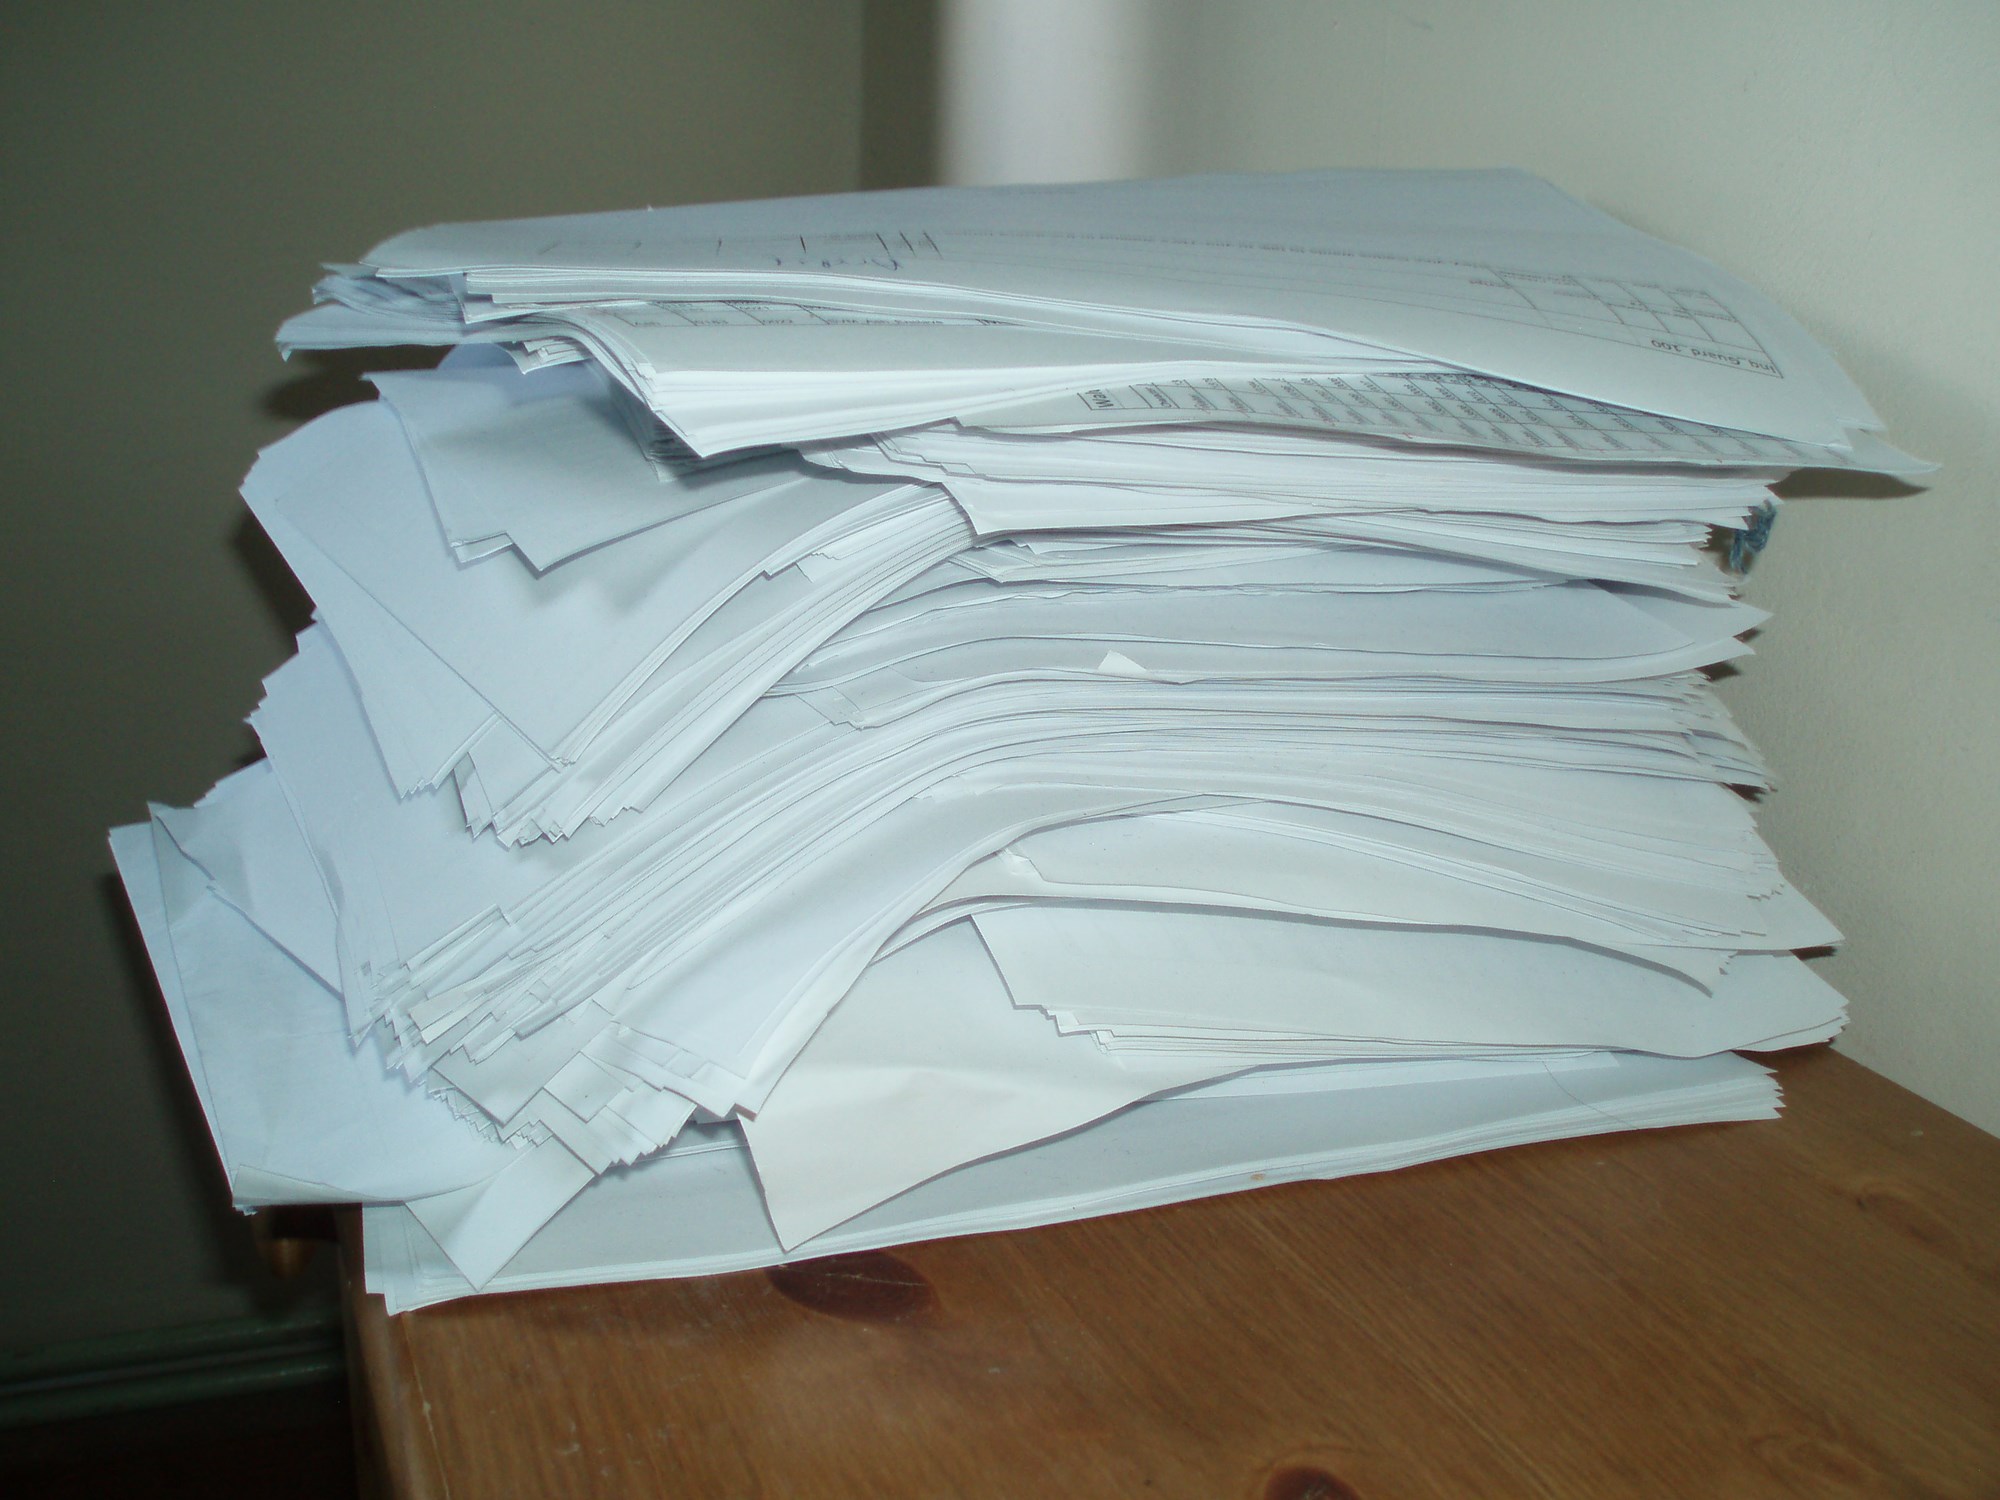 Most of the printed script for Risen.